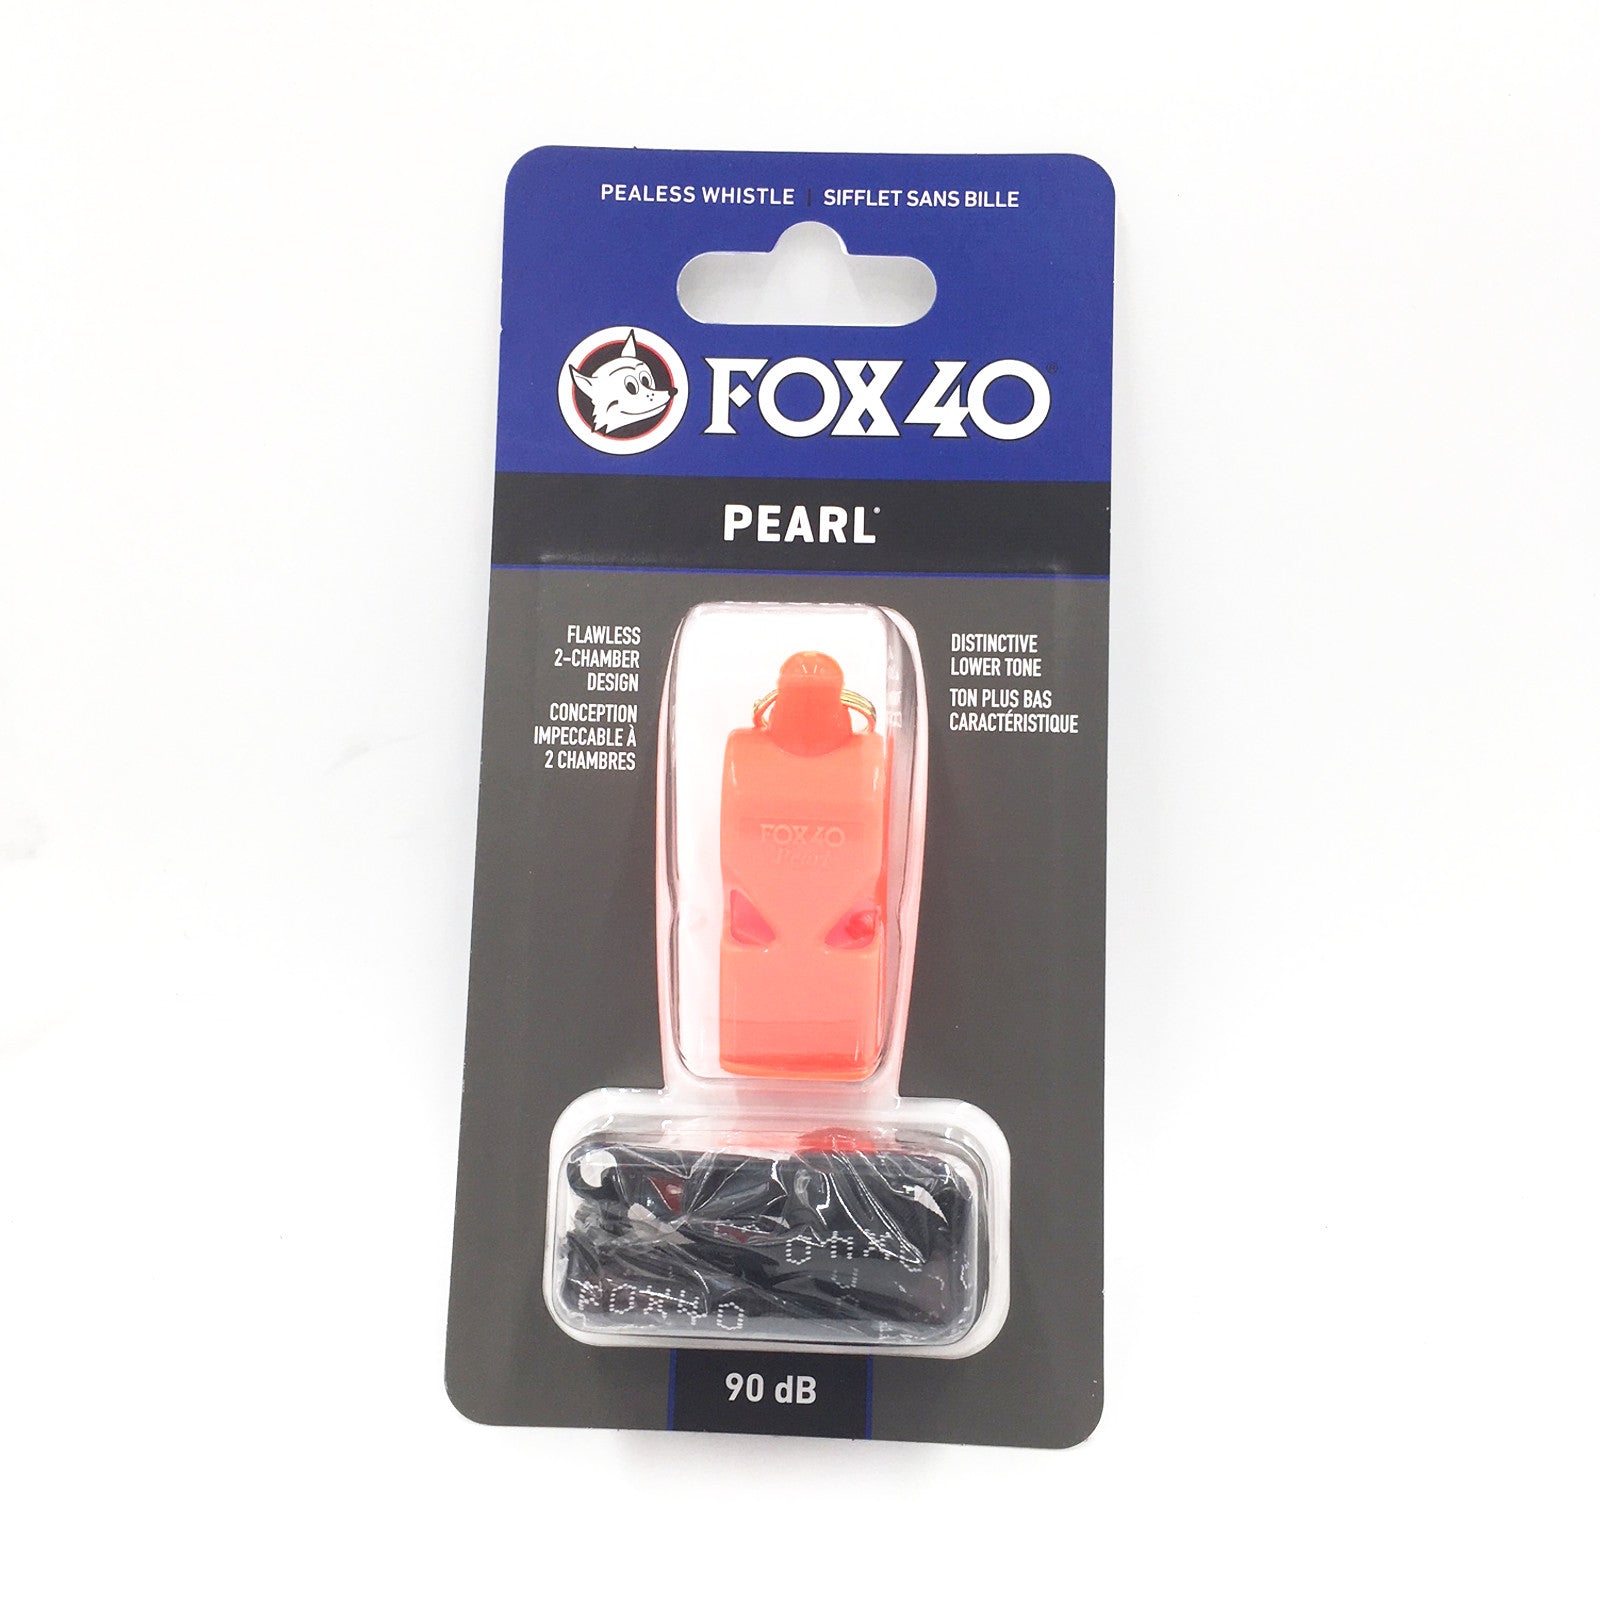 Fox 40 Pearl Whistle With Strap